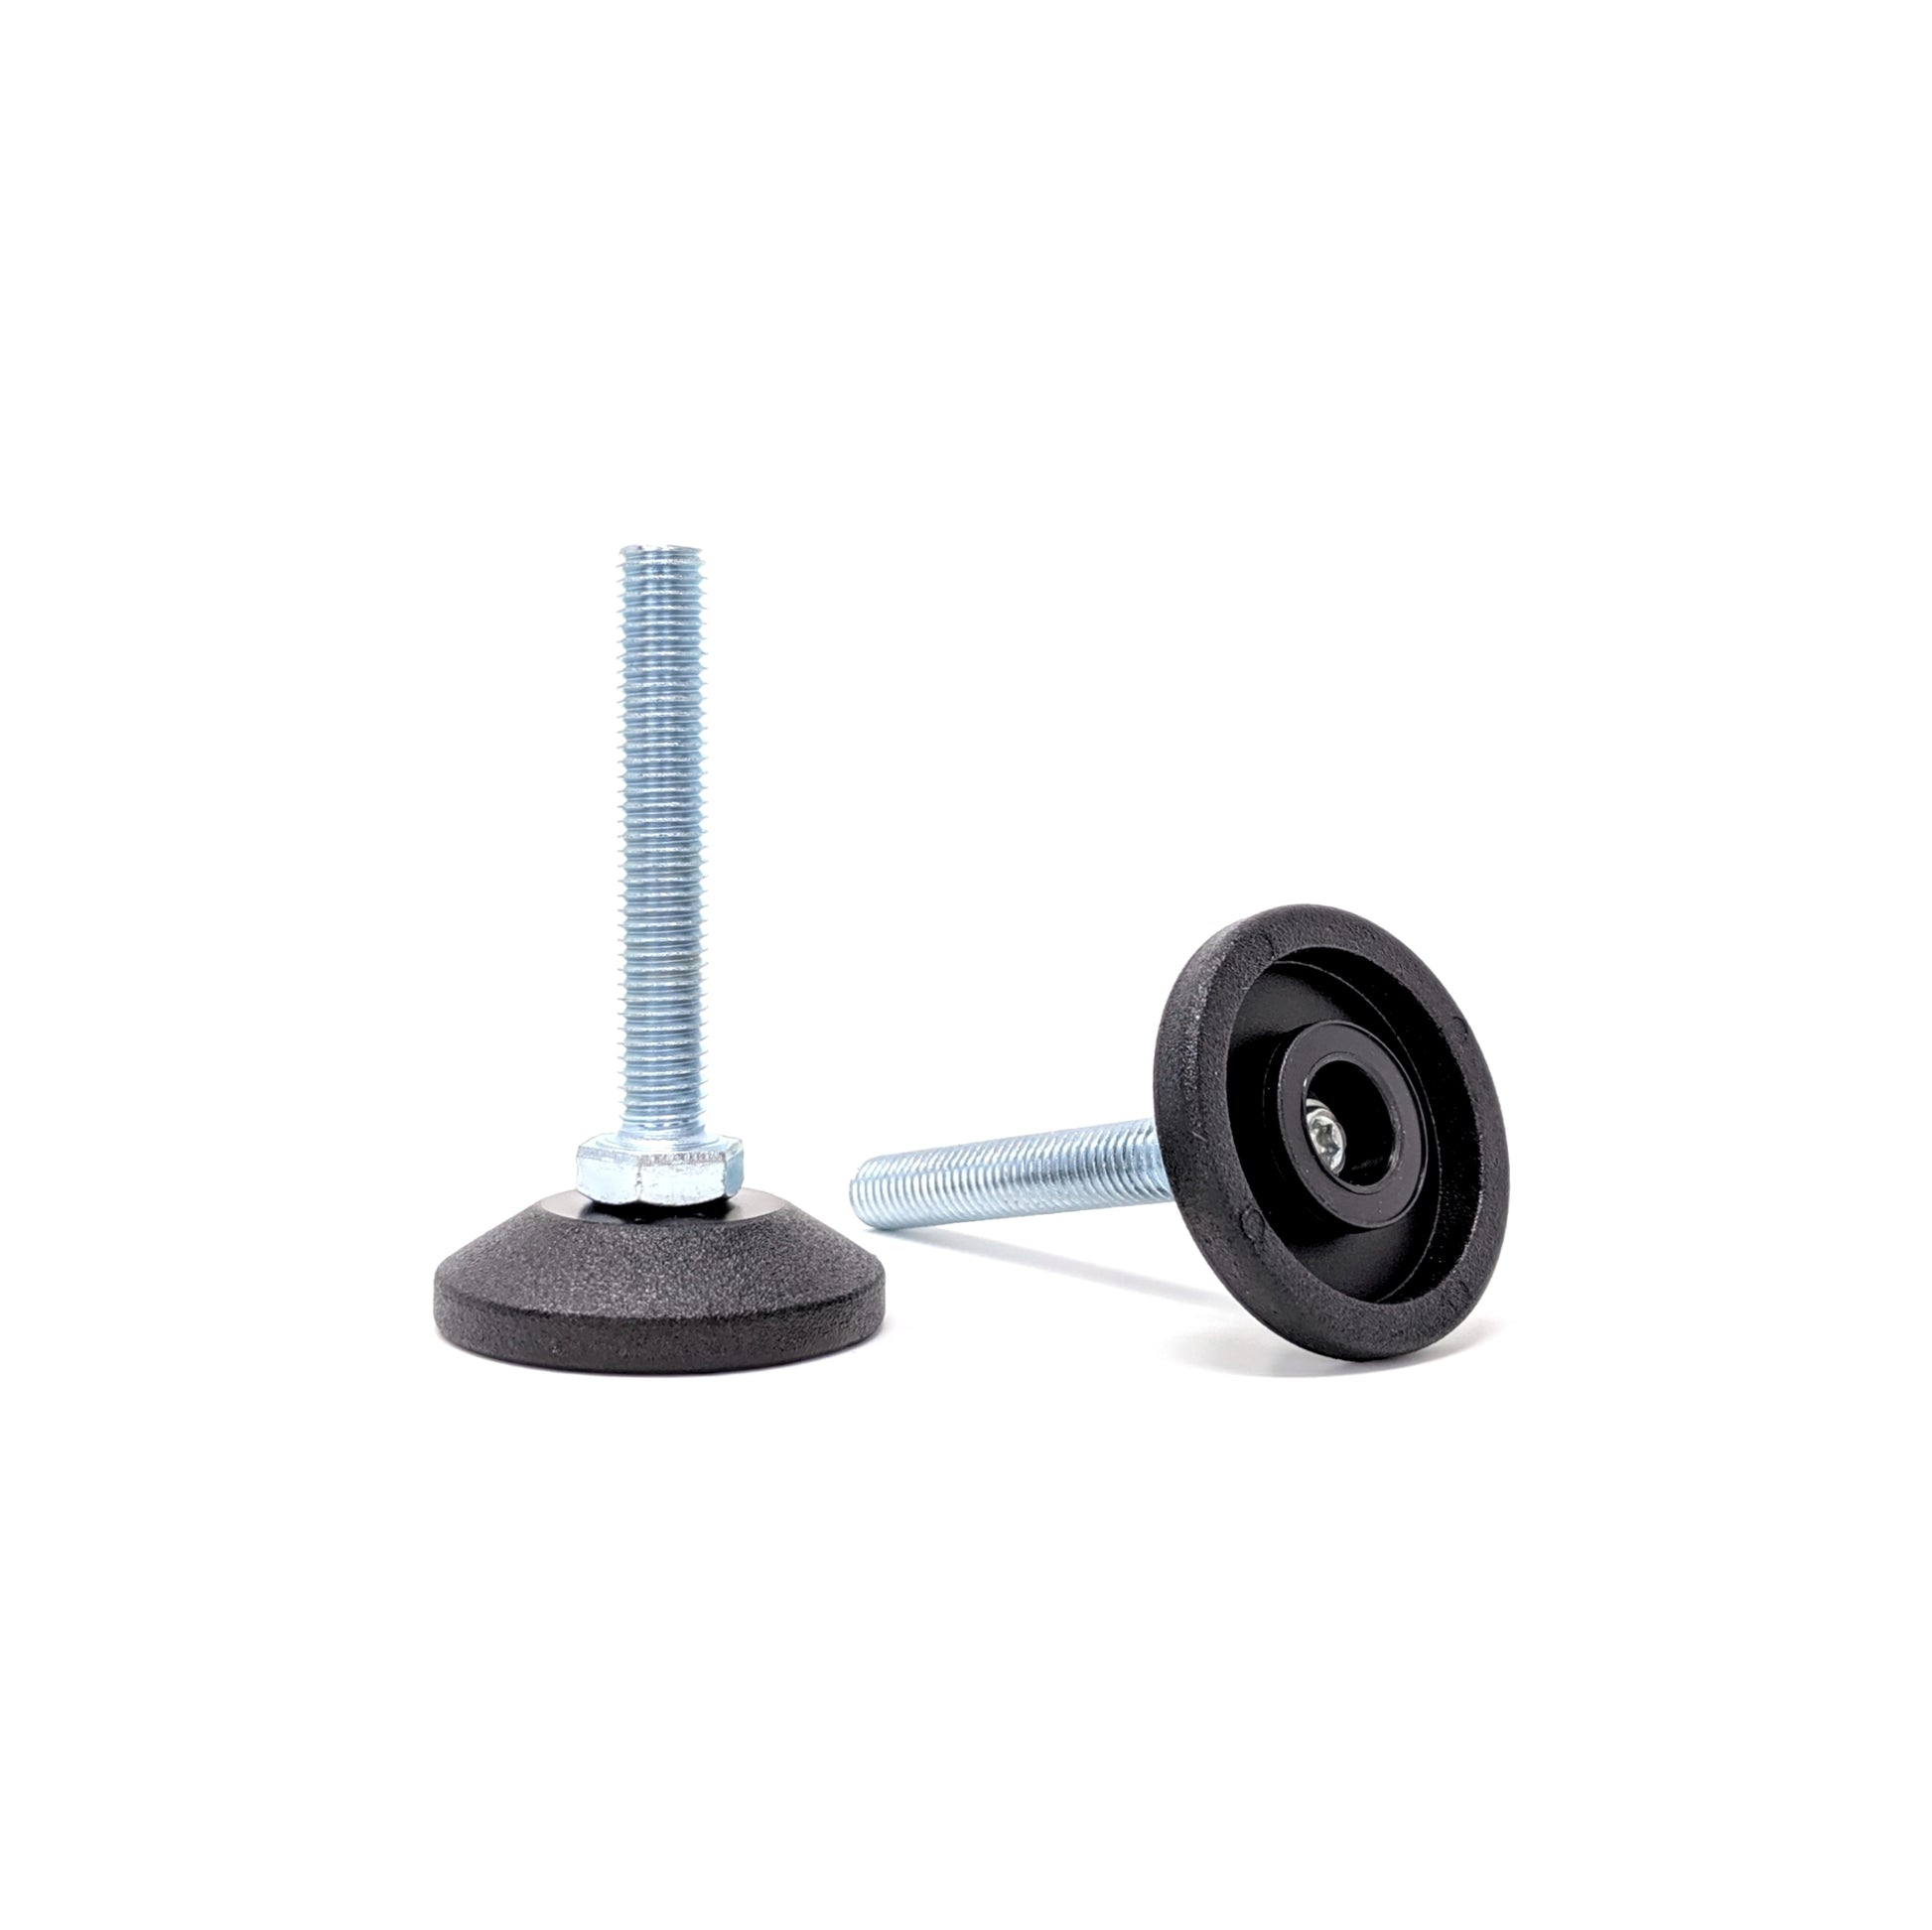 Adjustable Feet, 38mm Dia. Base, M8 50mm Thread, 400kg Static Load Capacity - Made In Germany - Keay Vital Parts